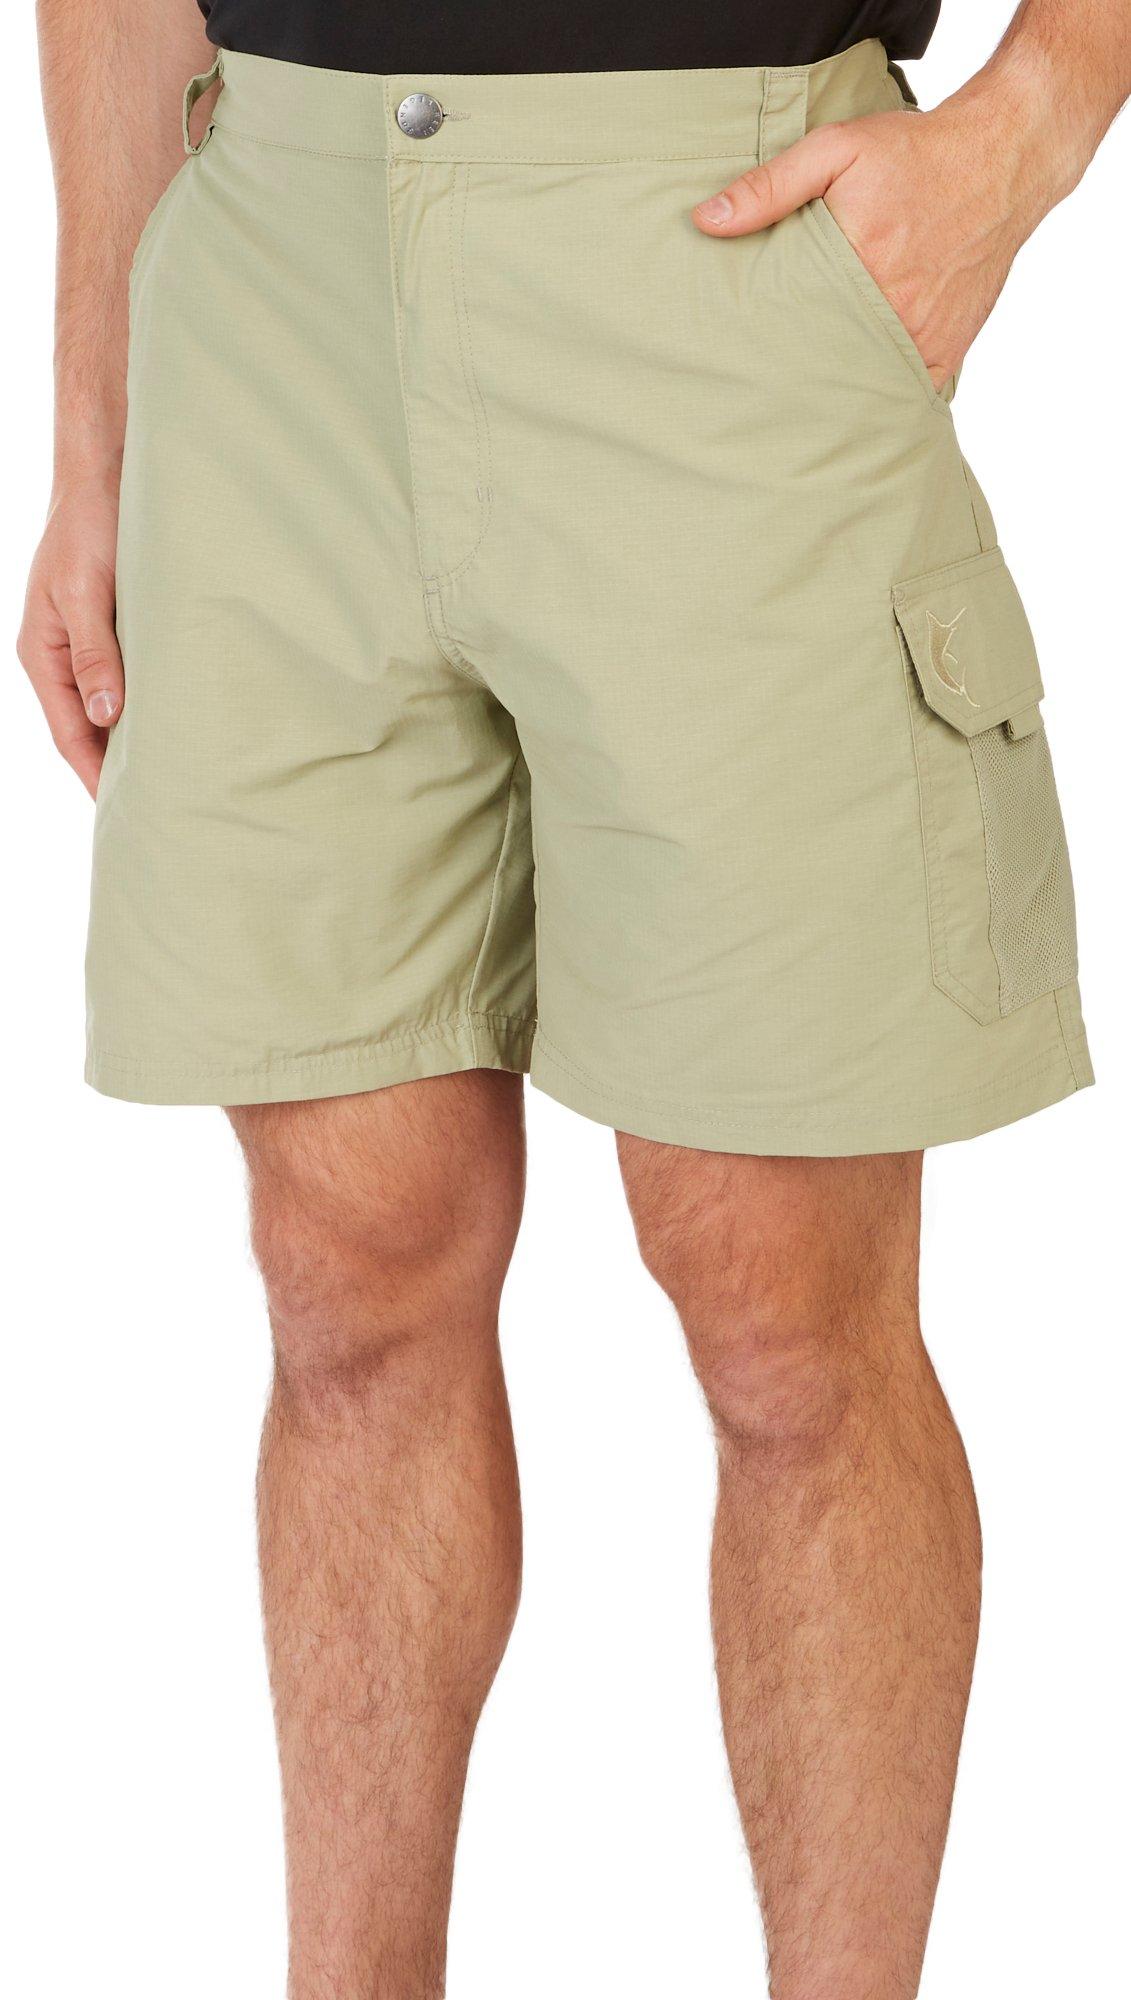 Reel Legends Mens Solid Tarpon Quick Dry 7 in. Cargo Shorts - Sage (Tea) - X-Large